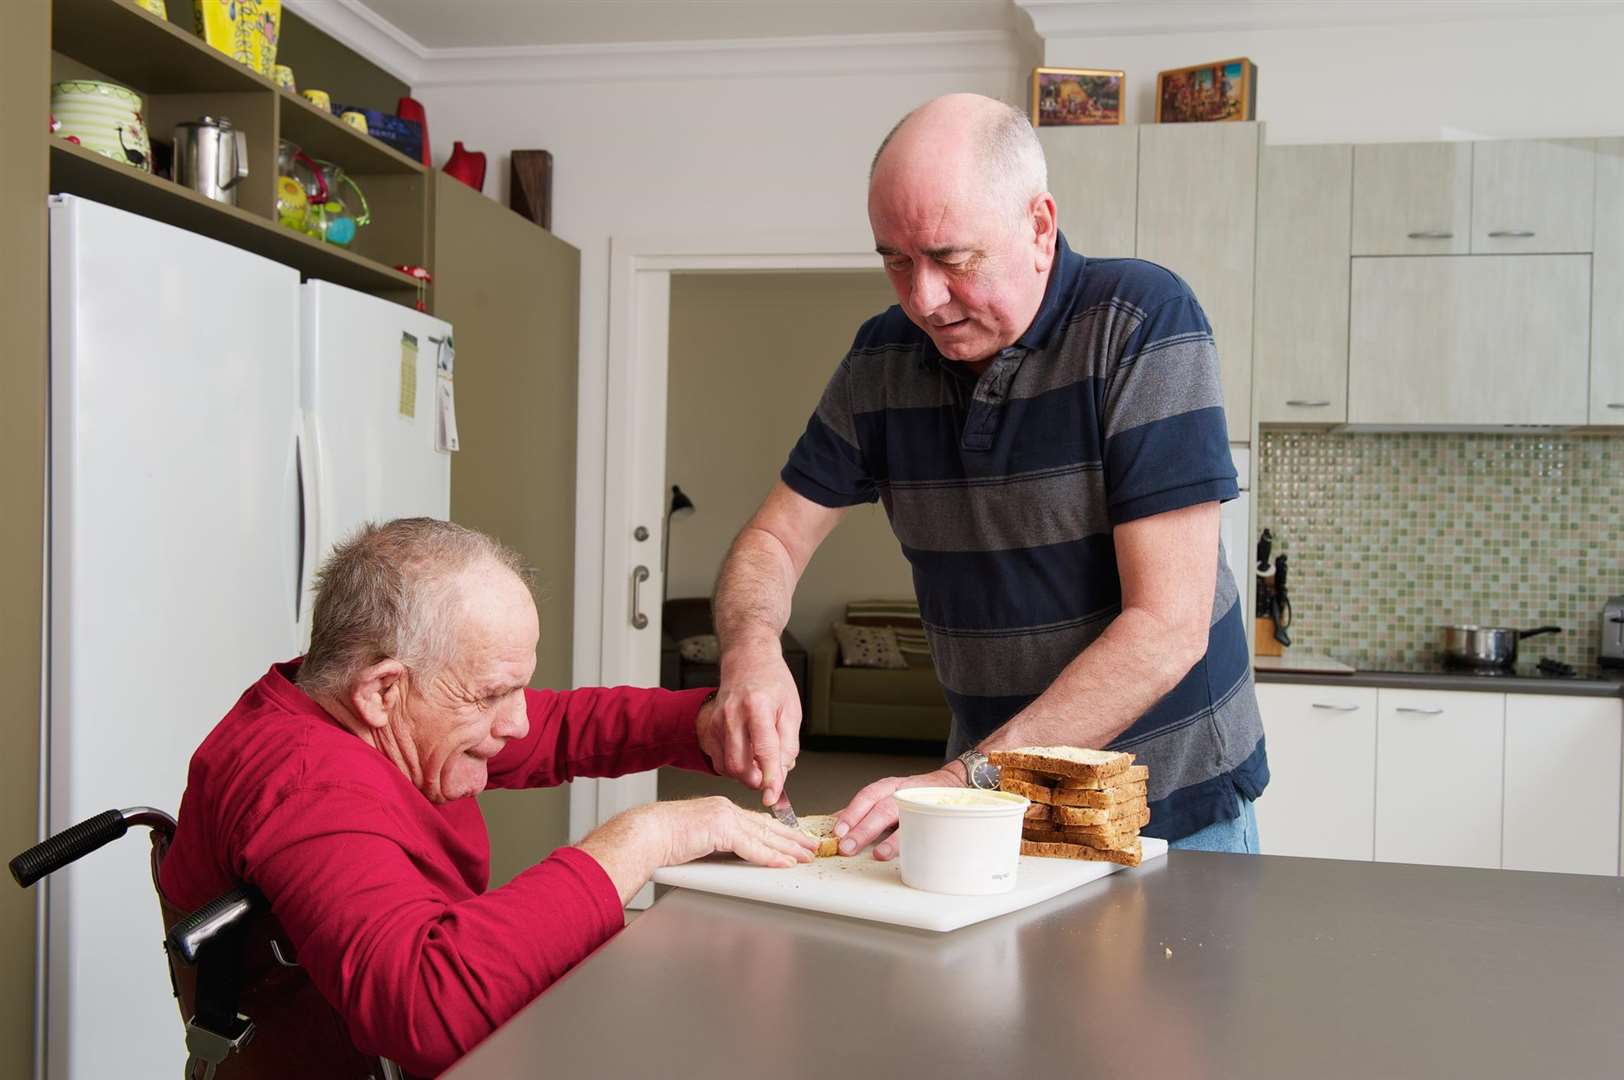 Unpaid carers can get additional support from Shared Lives